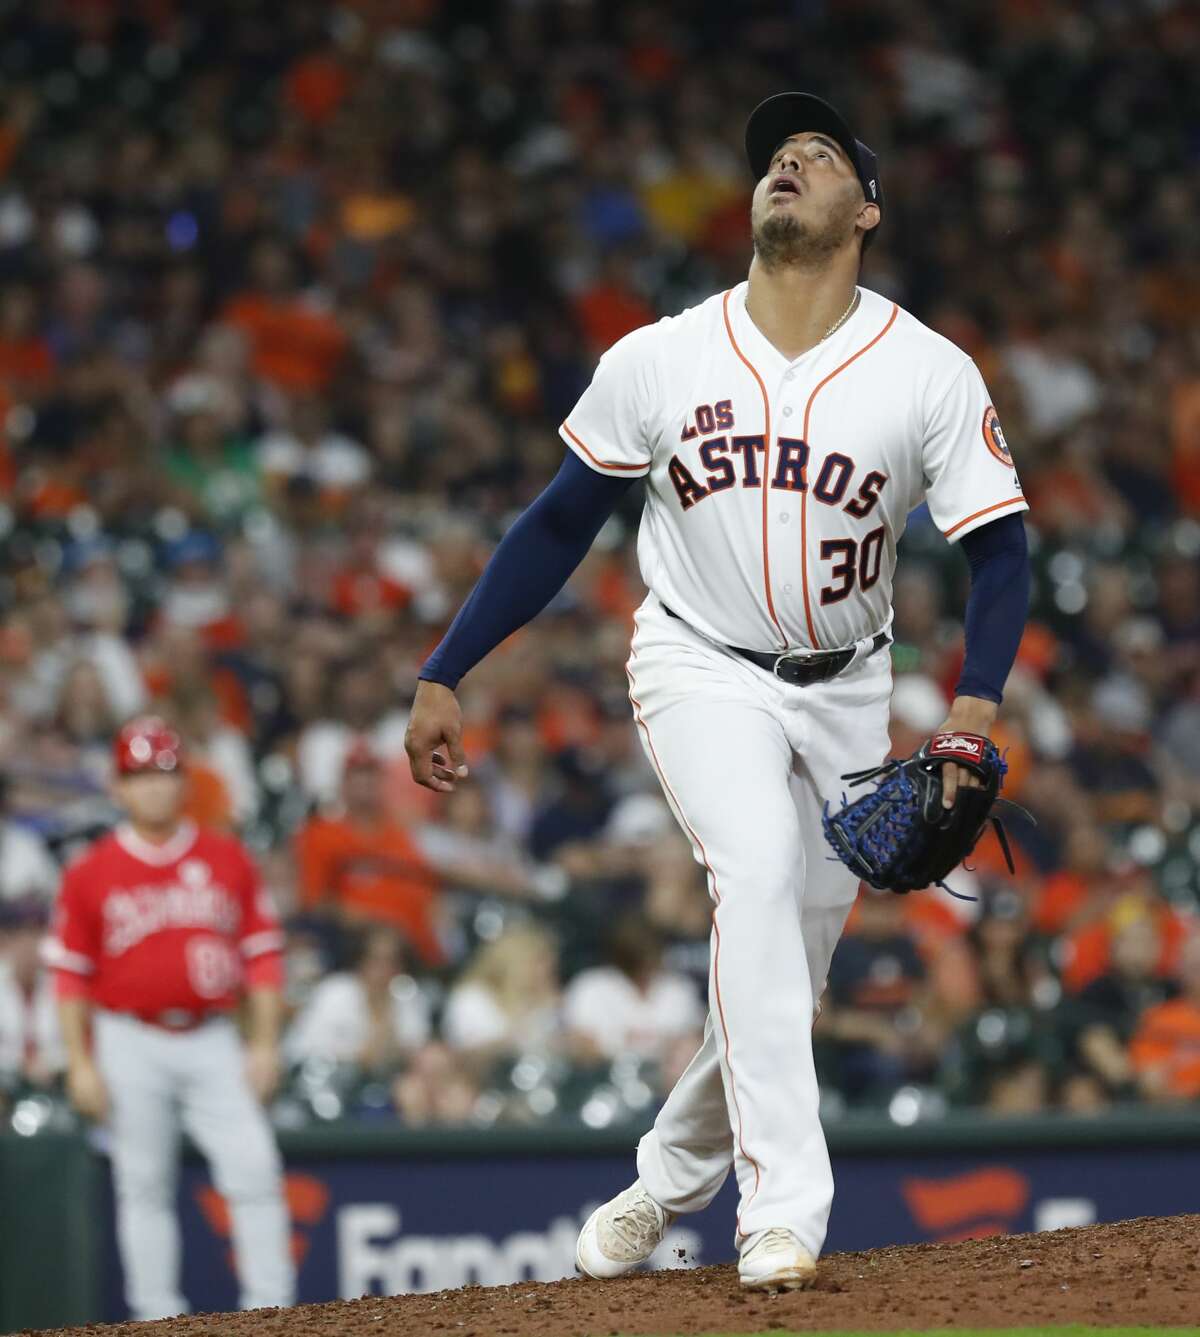 Houston Astros relief pitcher Hector Rondon (30) watches Los Angeles Angels Kole Calhoun's home run ball go over his head in the ninth inning of an MLB baseball game at Minute Maid Park, Saturday, Sept. 21, 2019, in Houston.